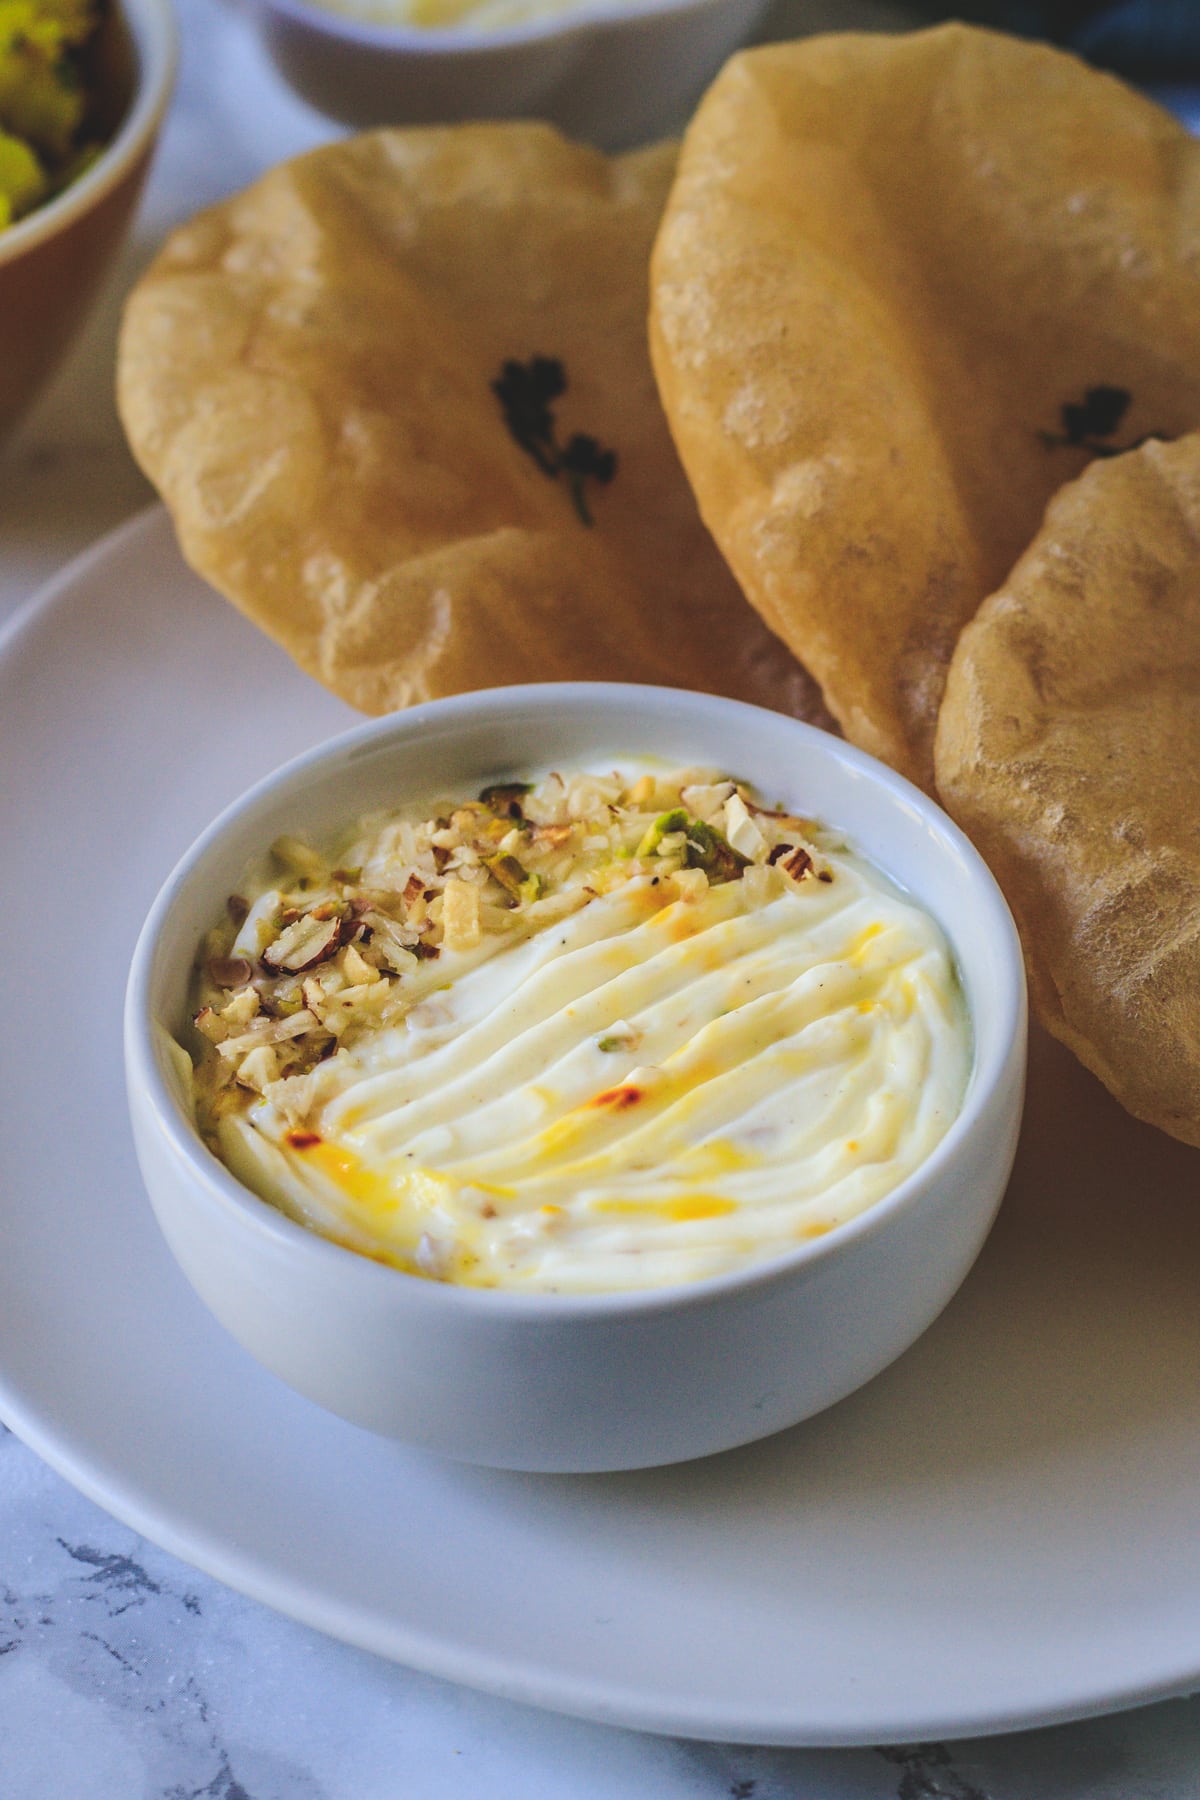 Shrikhand in a bowl with garnish of nuts served with pooris